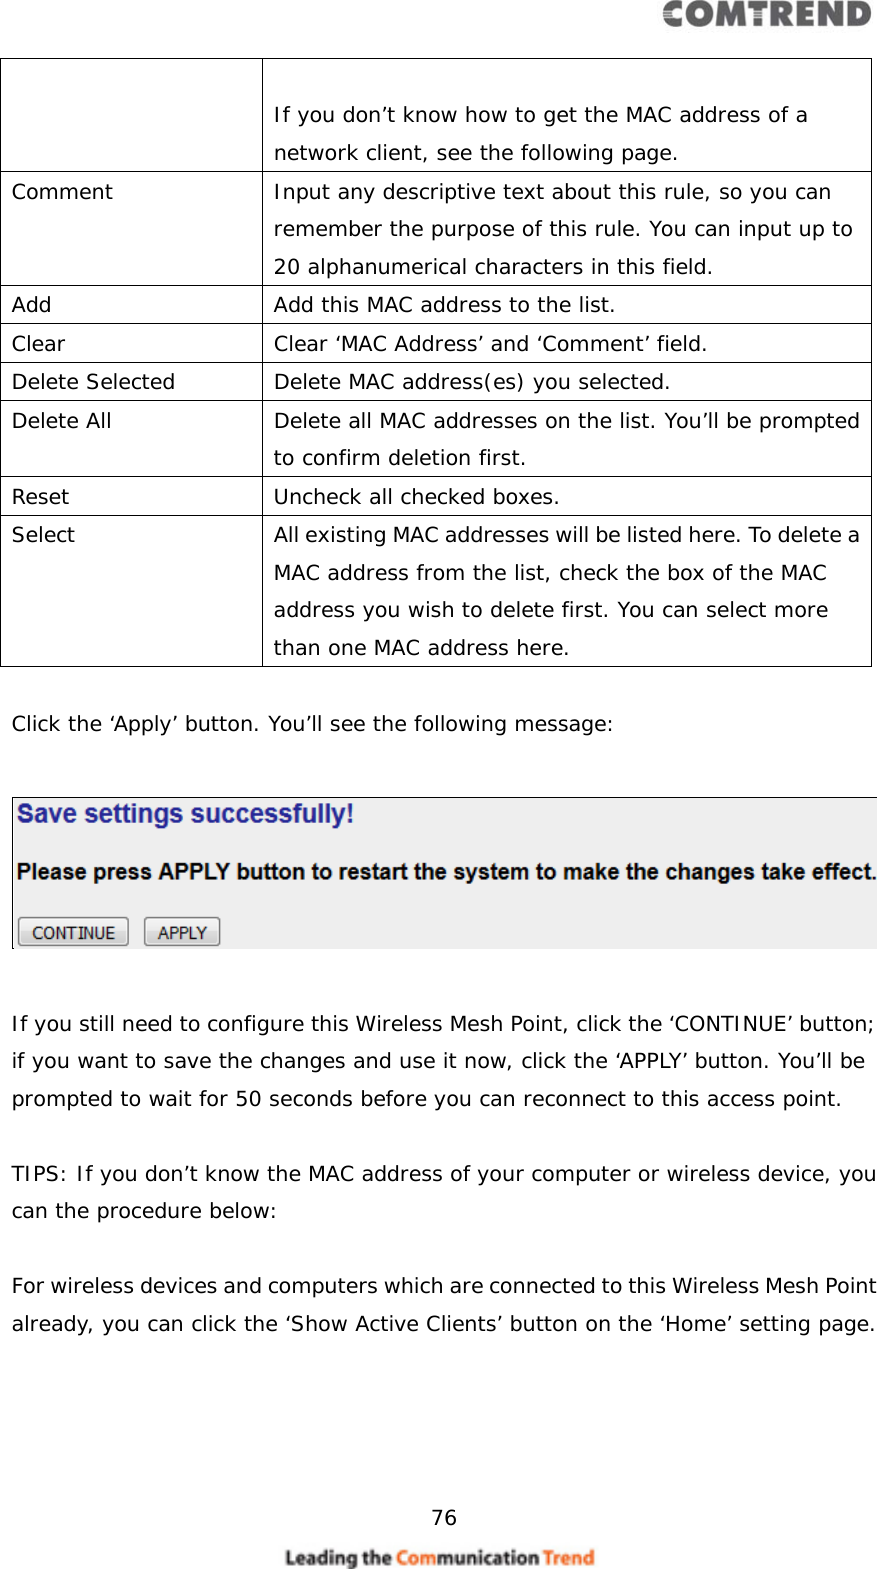     76   If you don’t know how to get the MAC address of a network client, see the following page. Comment  Input any descriptive text about this rule, so you can remember the purpose of this rule. You can input up to 20 alphanumerical characters in this field. Add  Add this MAC address to the list. Clear Clear ‘MAC Address’ and ‘Comment’ field. Delete Selected  Delete MAC address(es) you selected. Delete All  Delete all MAC addresses on the list. You’ll be prompted to confirm deletion first. Reset  Uncheck all checked boxes. Select  All existing MAC addresses will be listed here. To delete a MAC address from the list, check the box of the MAC address you wish to delete first. You can select more than one MAC address here.  Click the ‘Apply’ button. You’ll see the following message:   If you still need to configure this Wireless Mesh Point, click the ‘CONTINUE’ button; if you want to save the changes and use it now, click the ‘APPLY’ button. You’ll be prompted to wait for 50 seconds before you can reconnect to this access point.  TIPS: If you don’t know the MAC address of your computer or wireless device, you can the procedure below:  For wireless devices and computers which are connected to this Wireless Mesh Point already, you can click the ‘Show Active Clients’ button on the ‘Home’ setting page.  